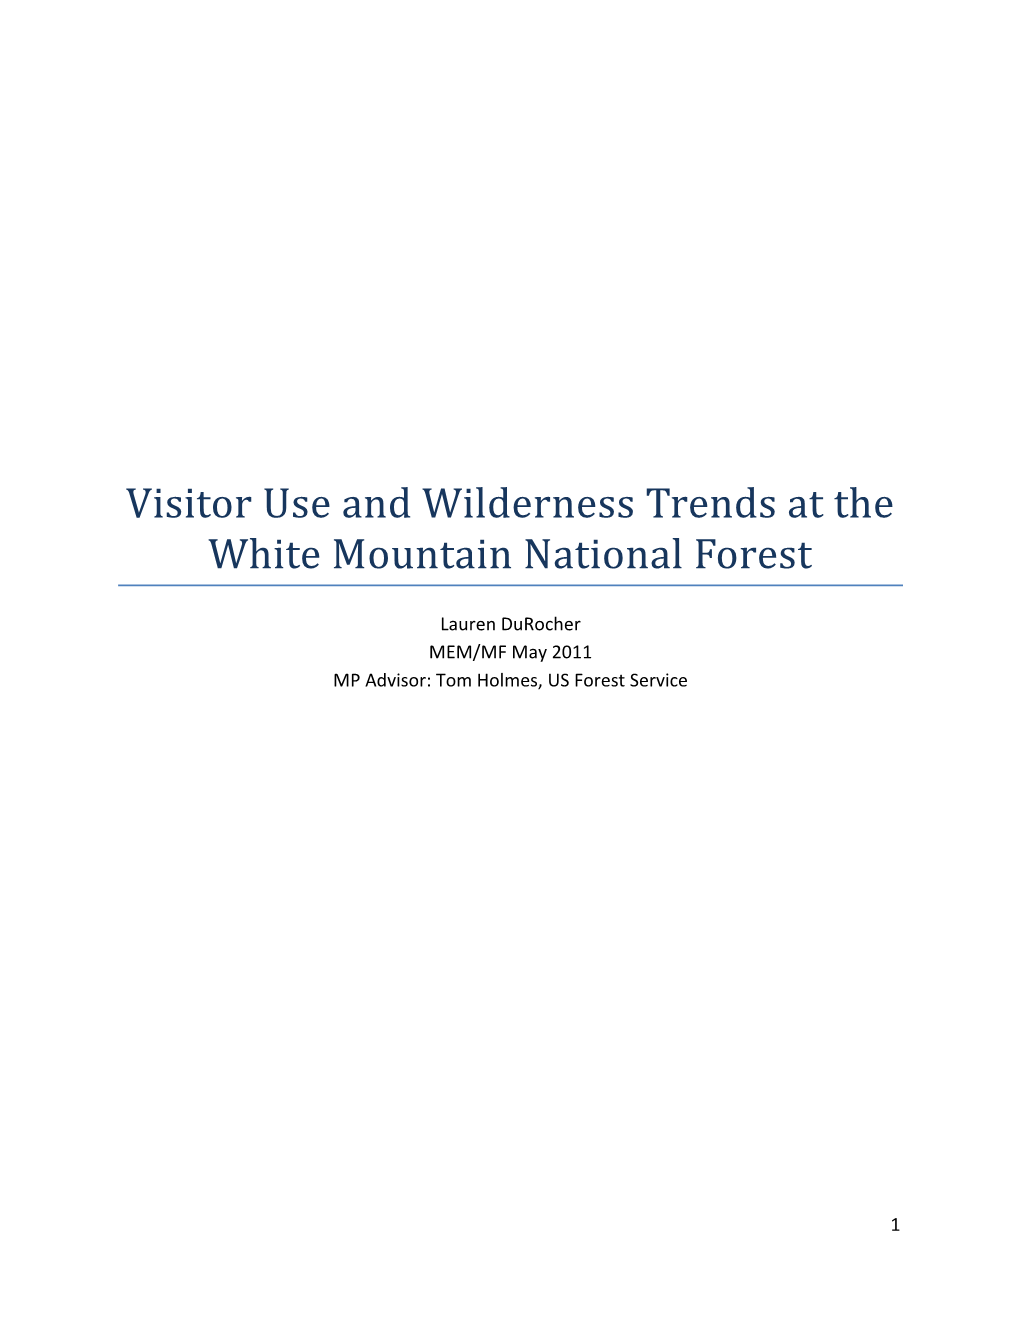 Visitor Use and Wilderness Trends at the White Mountain National Forest